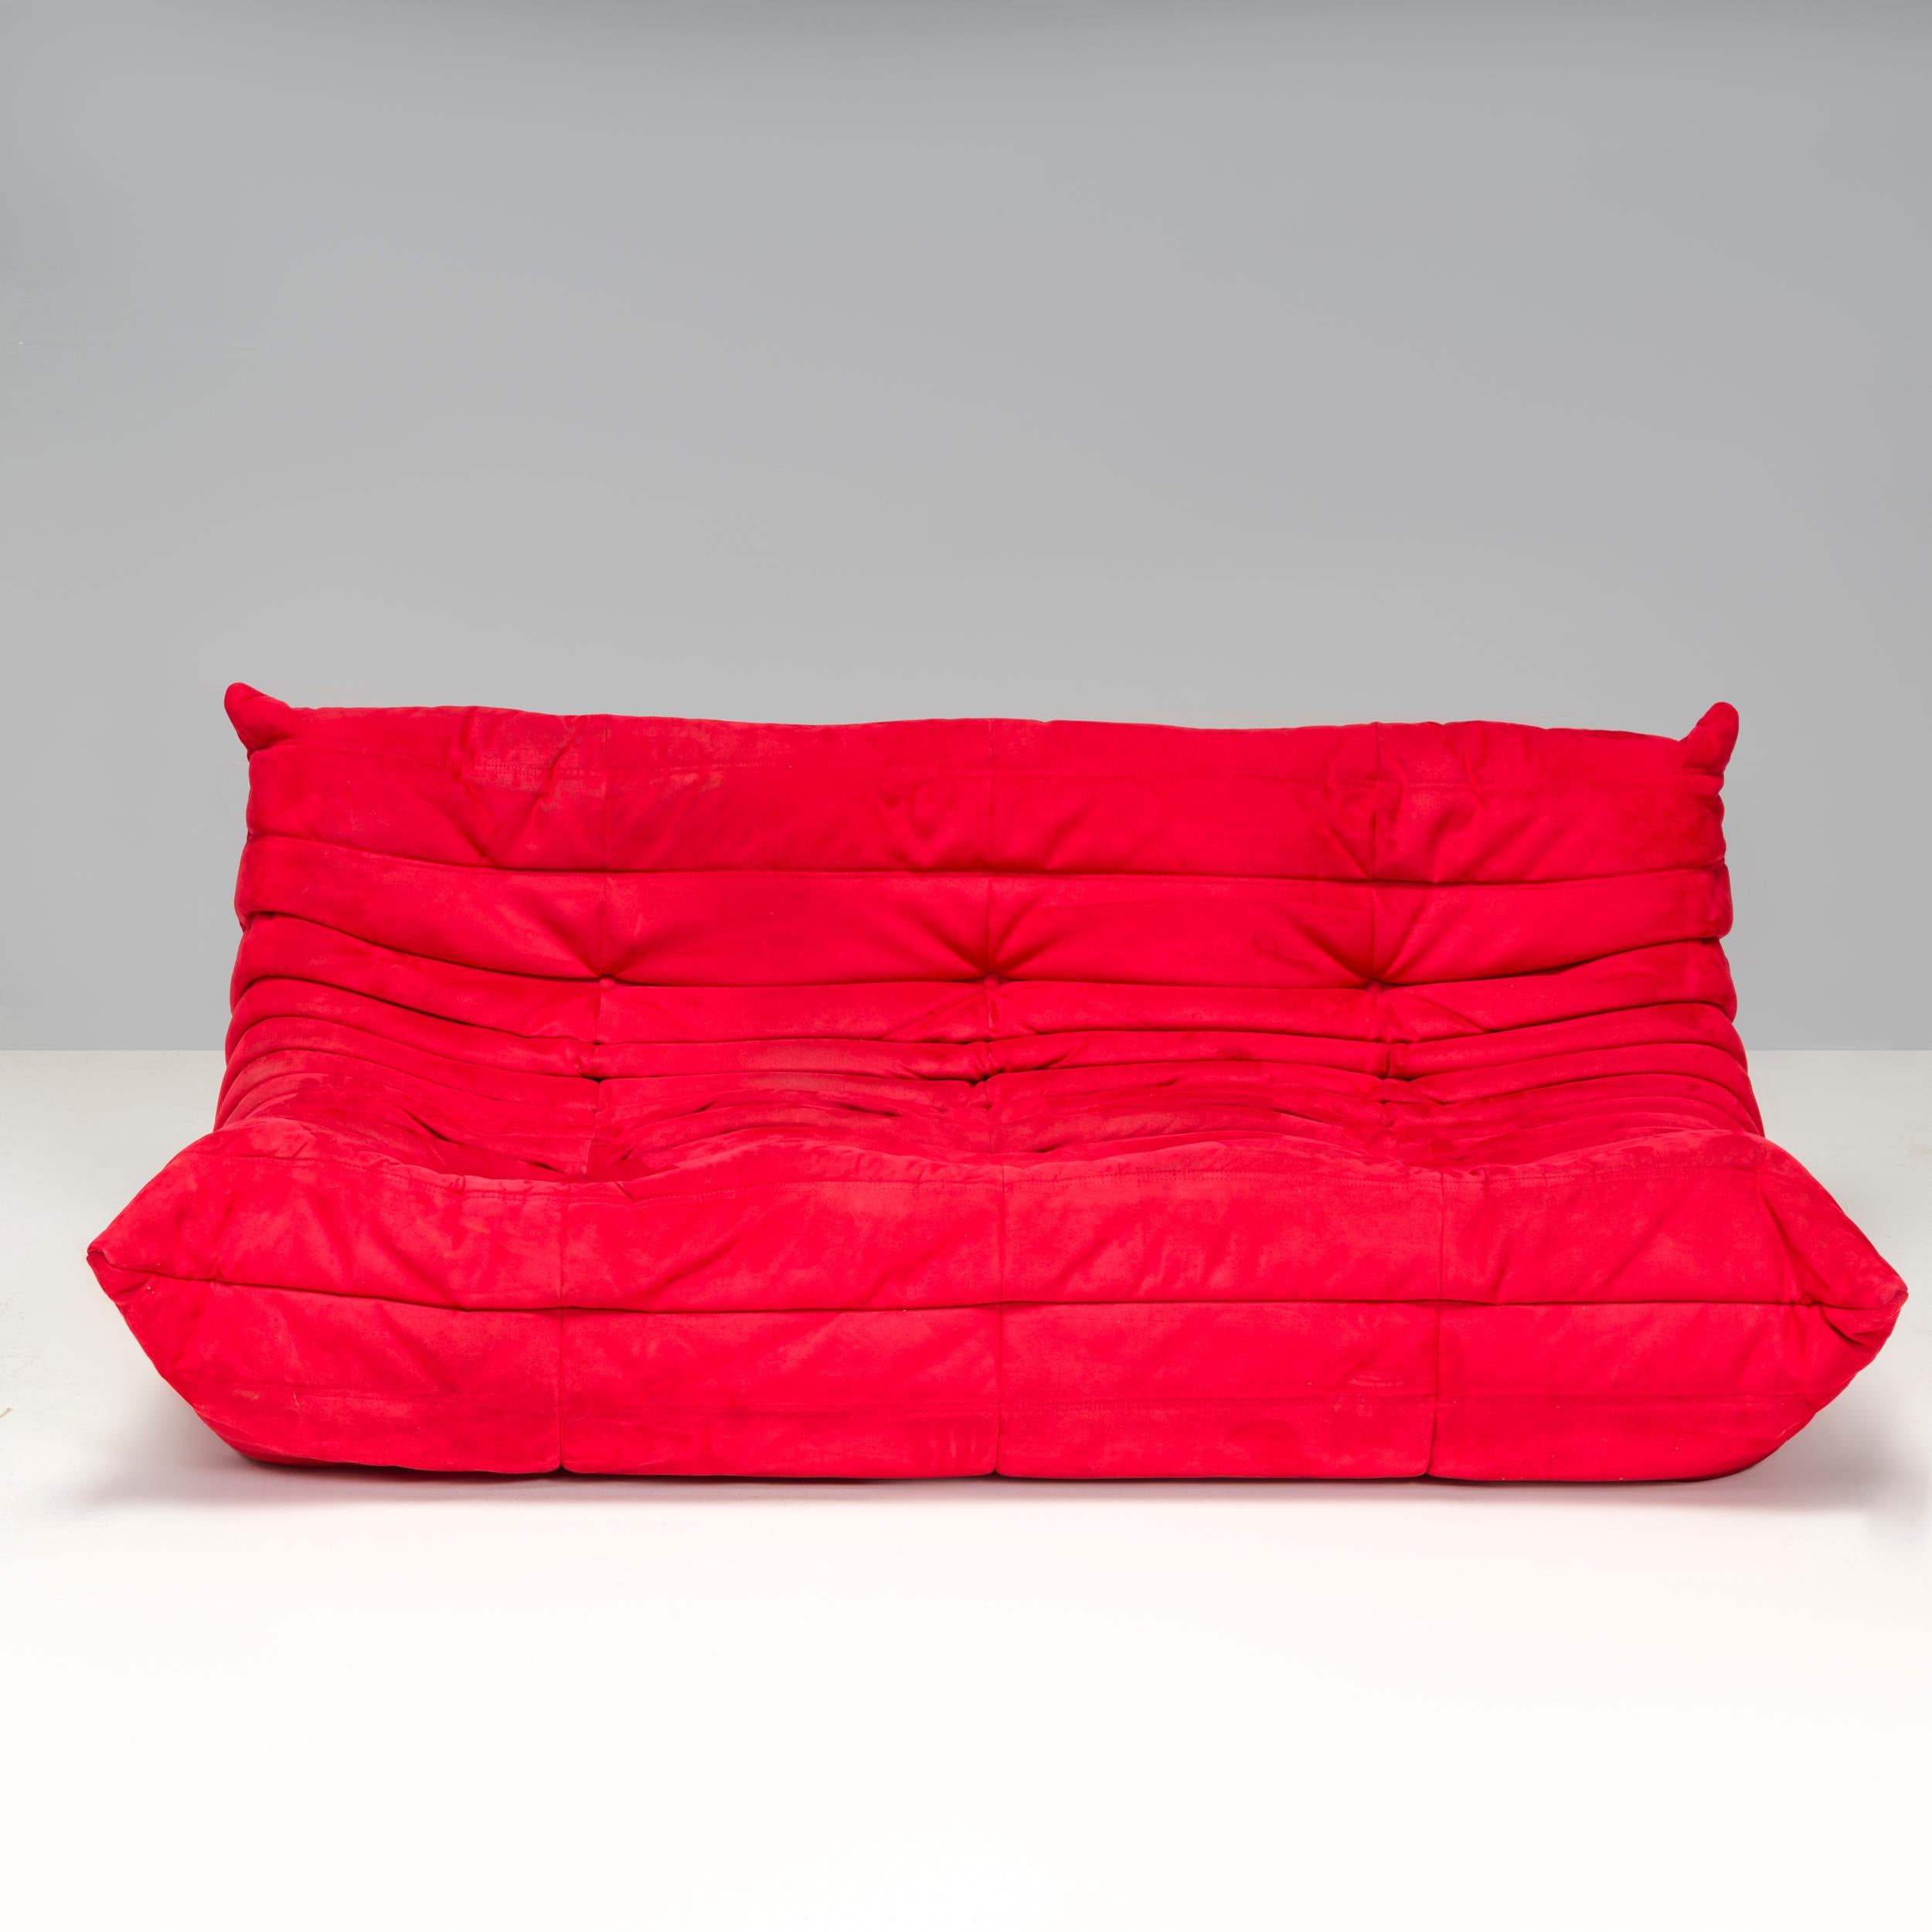 Ligne Roset by Michel Ducaroy Togo Red Alcantara Sectional Sofa, Set of 3 In Good Condition For Sale In London, GB